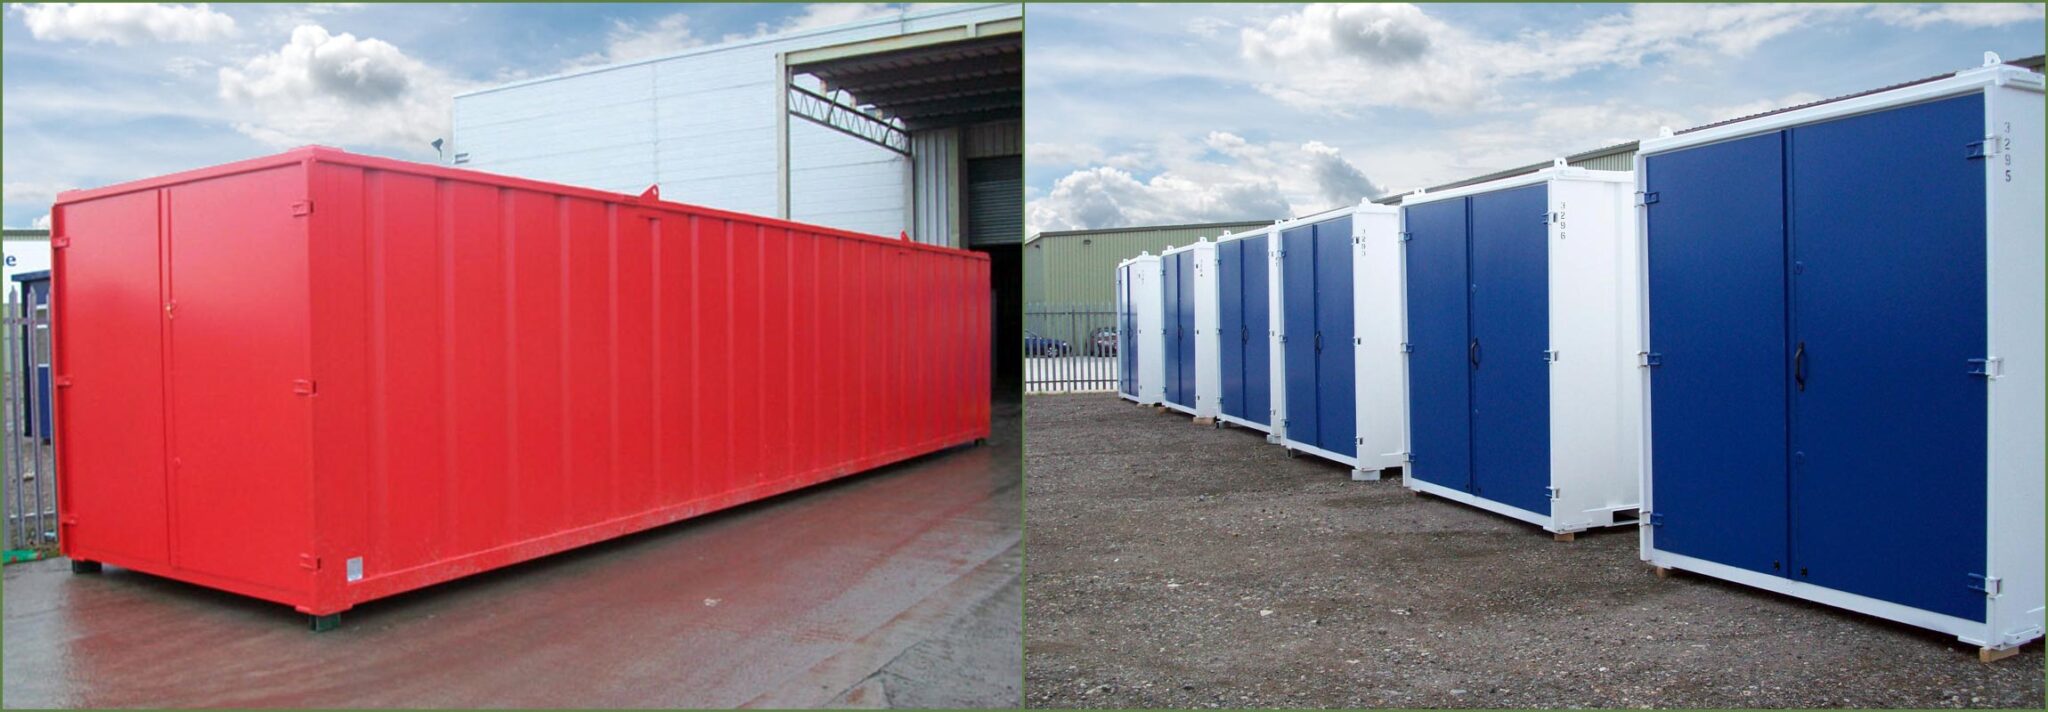 Steel Container Storage Solutions